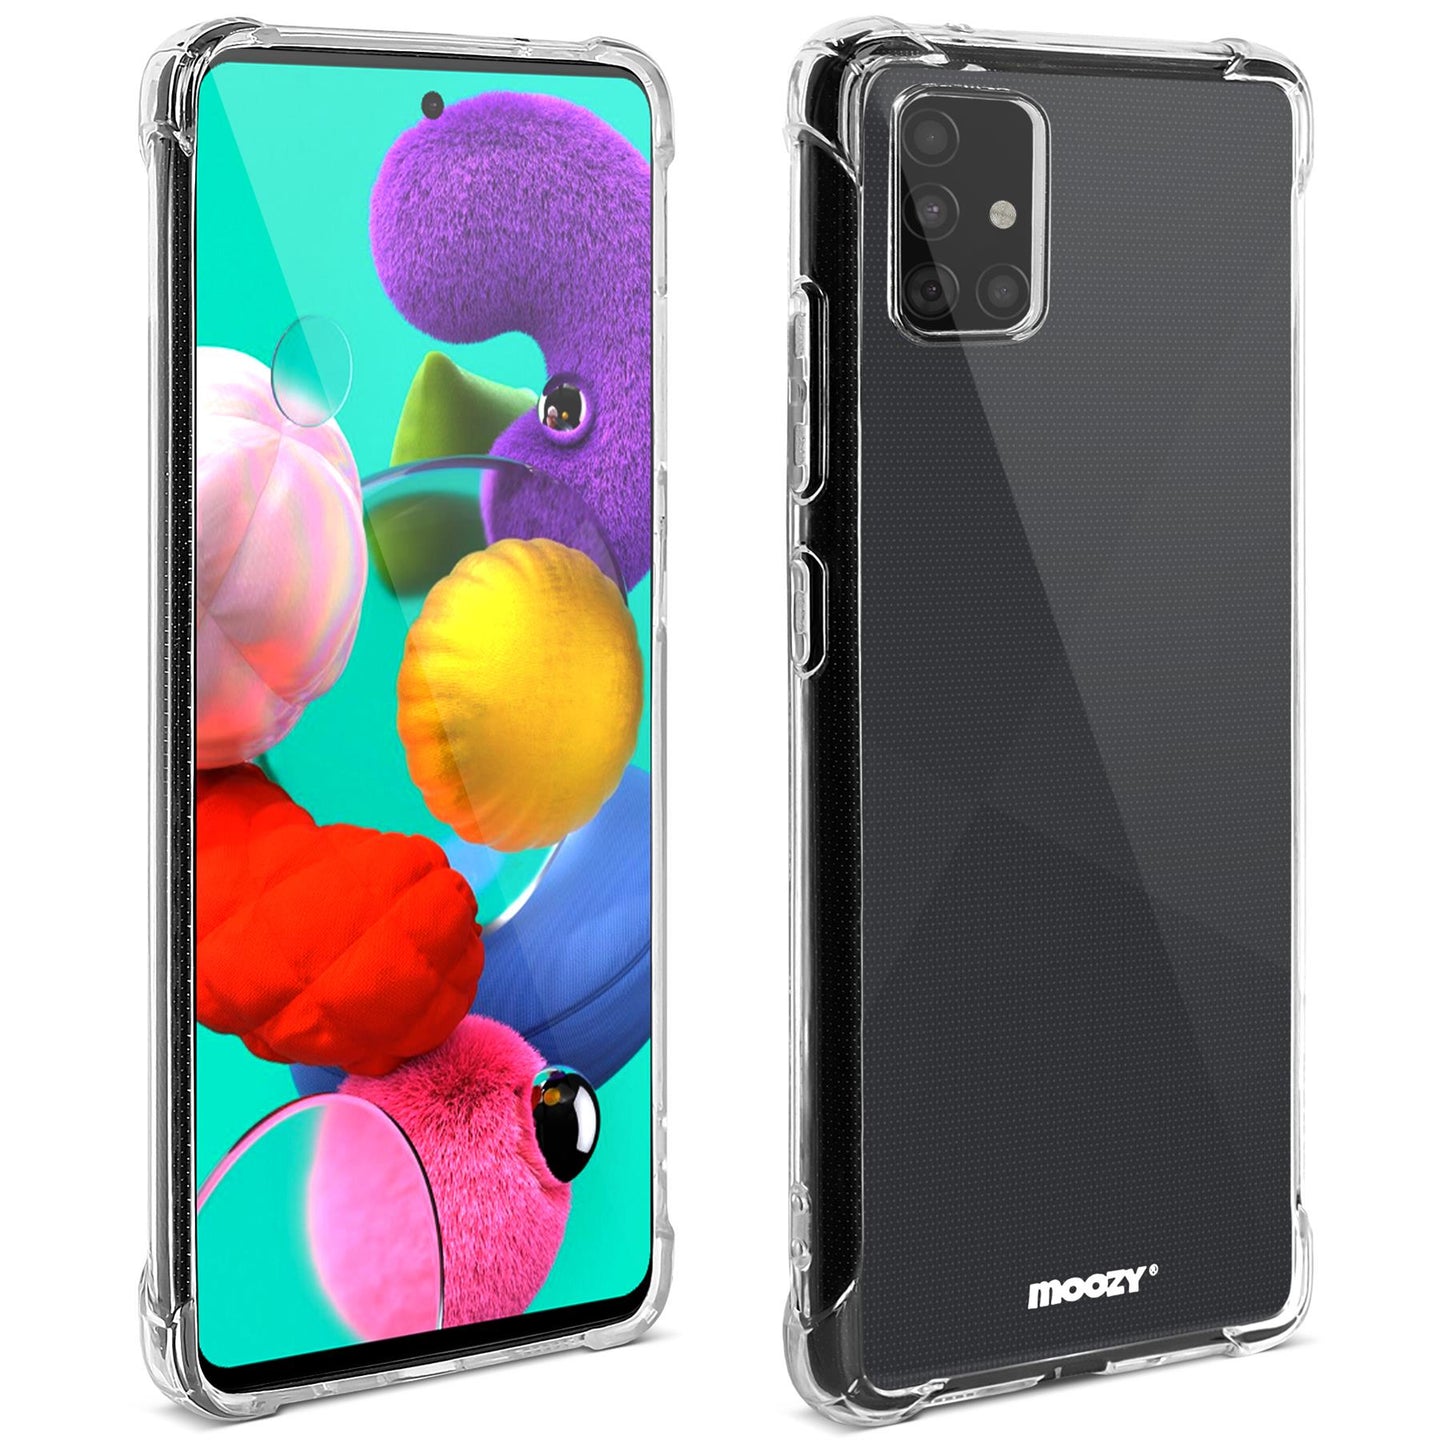 Moozy Shock Proof Silicone Case for Samsung A51 - Transparent Crystal Clear Phone Case Soft TPU Cover